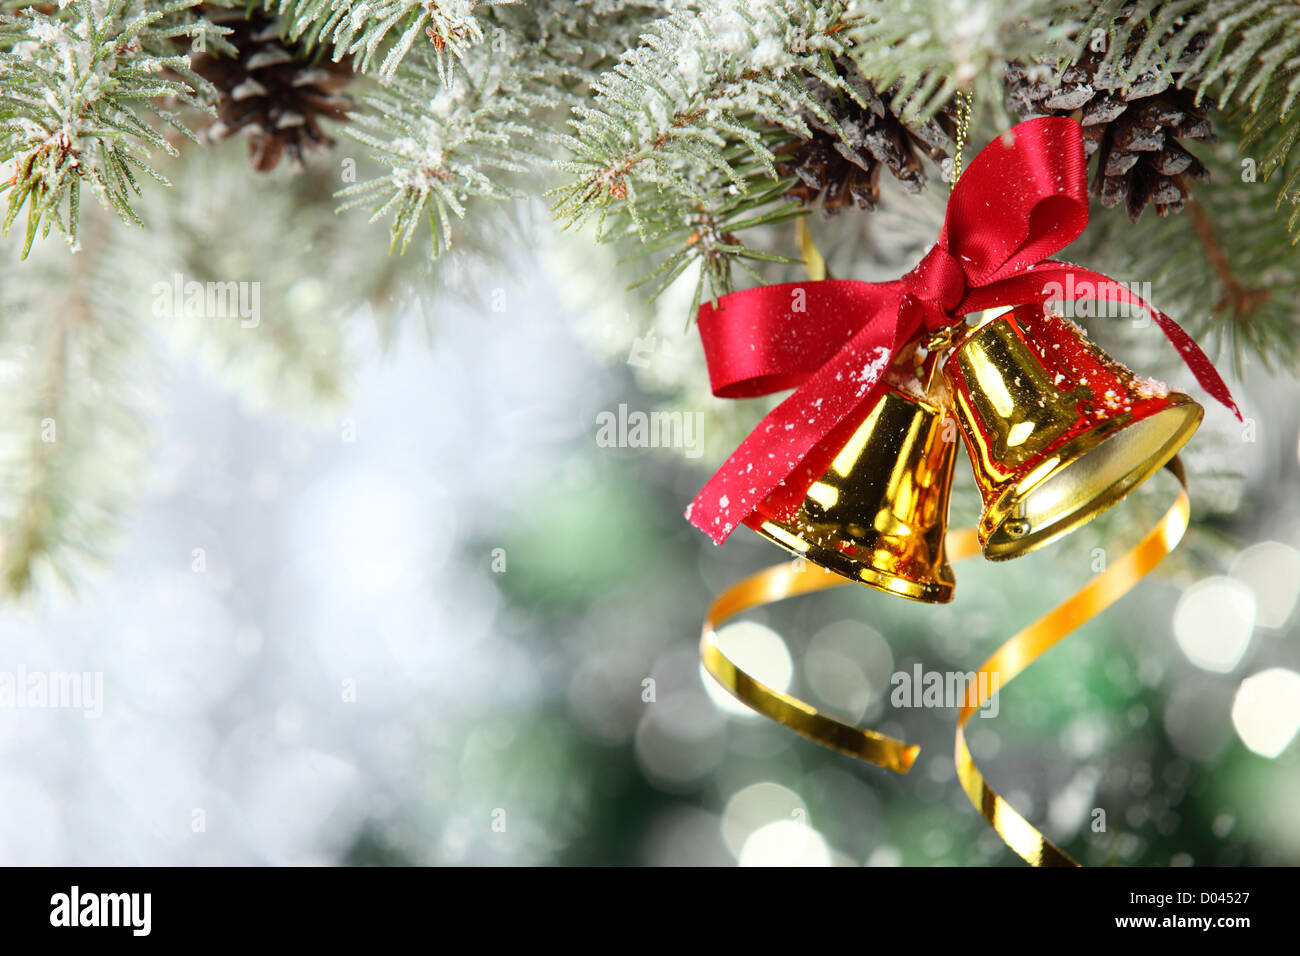 Closeup of Jingle bell from Christmas tree. Stock Photo